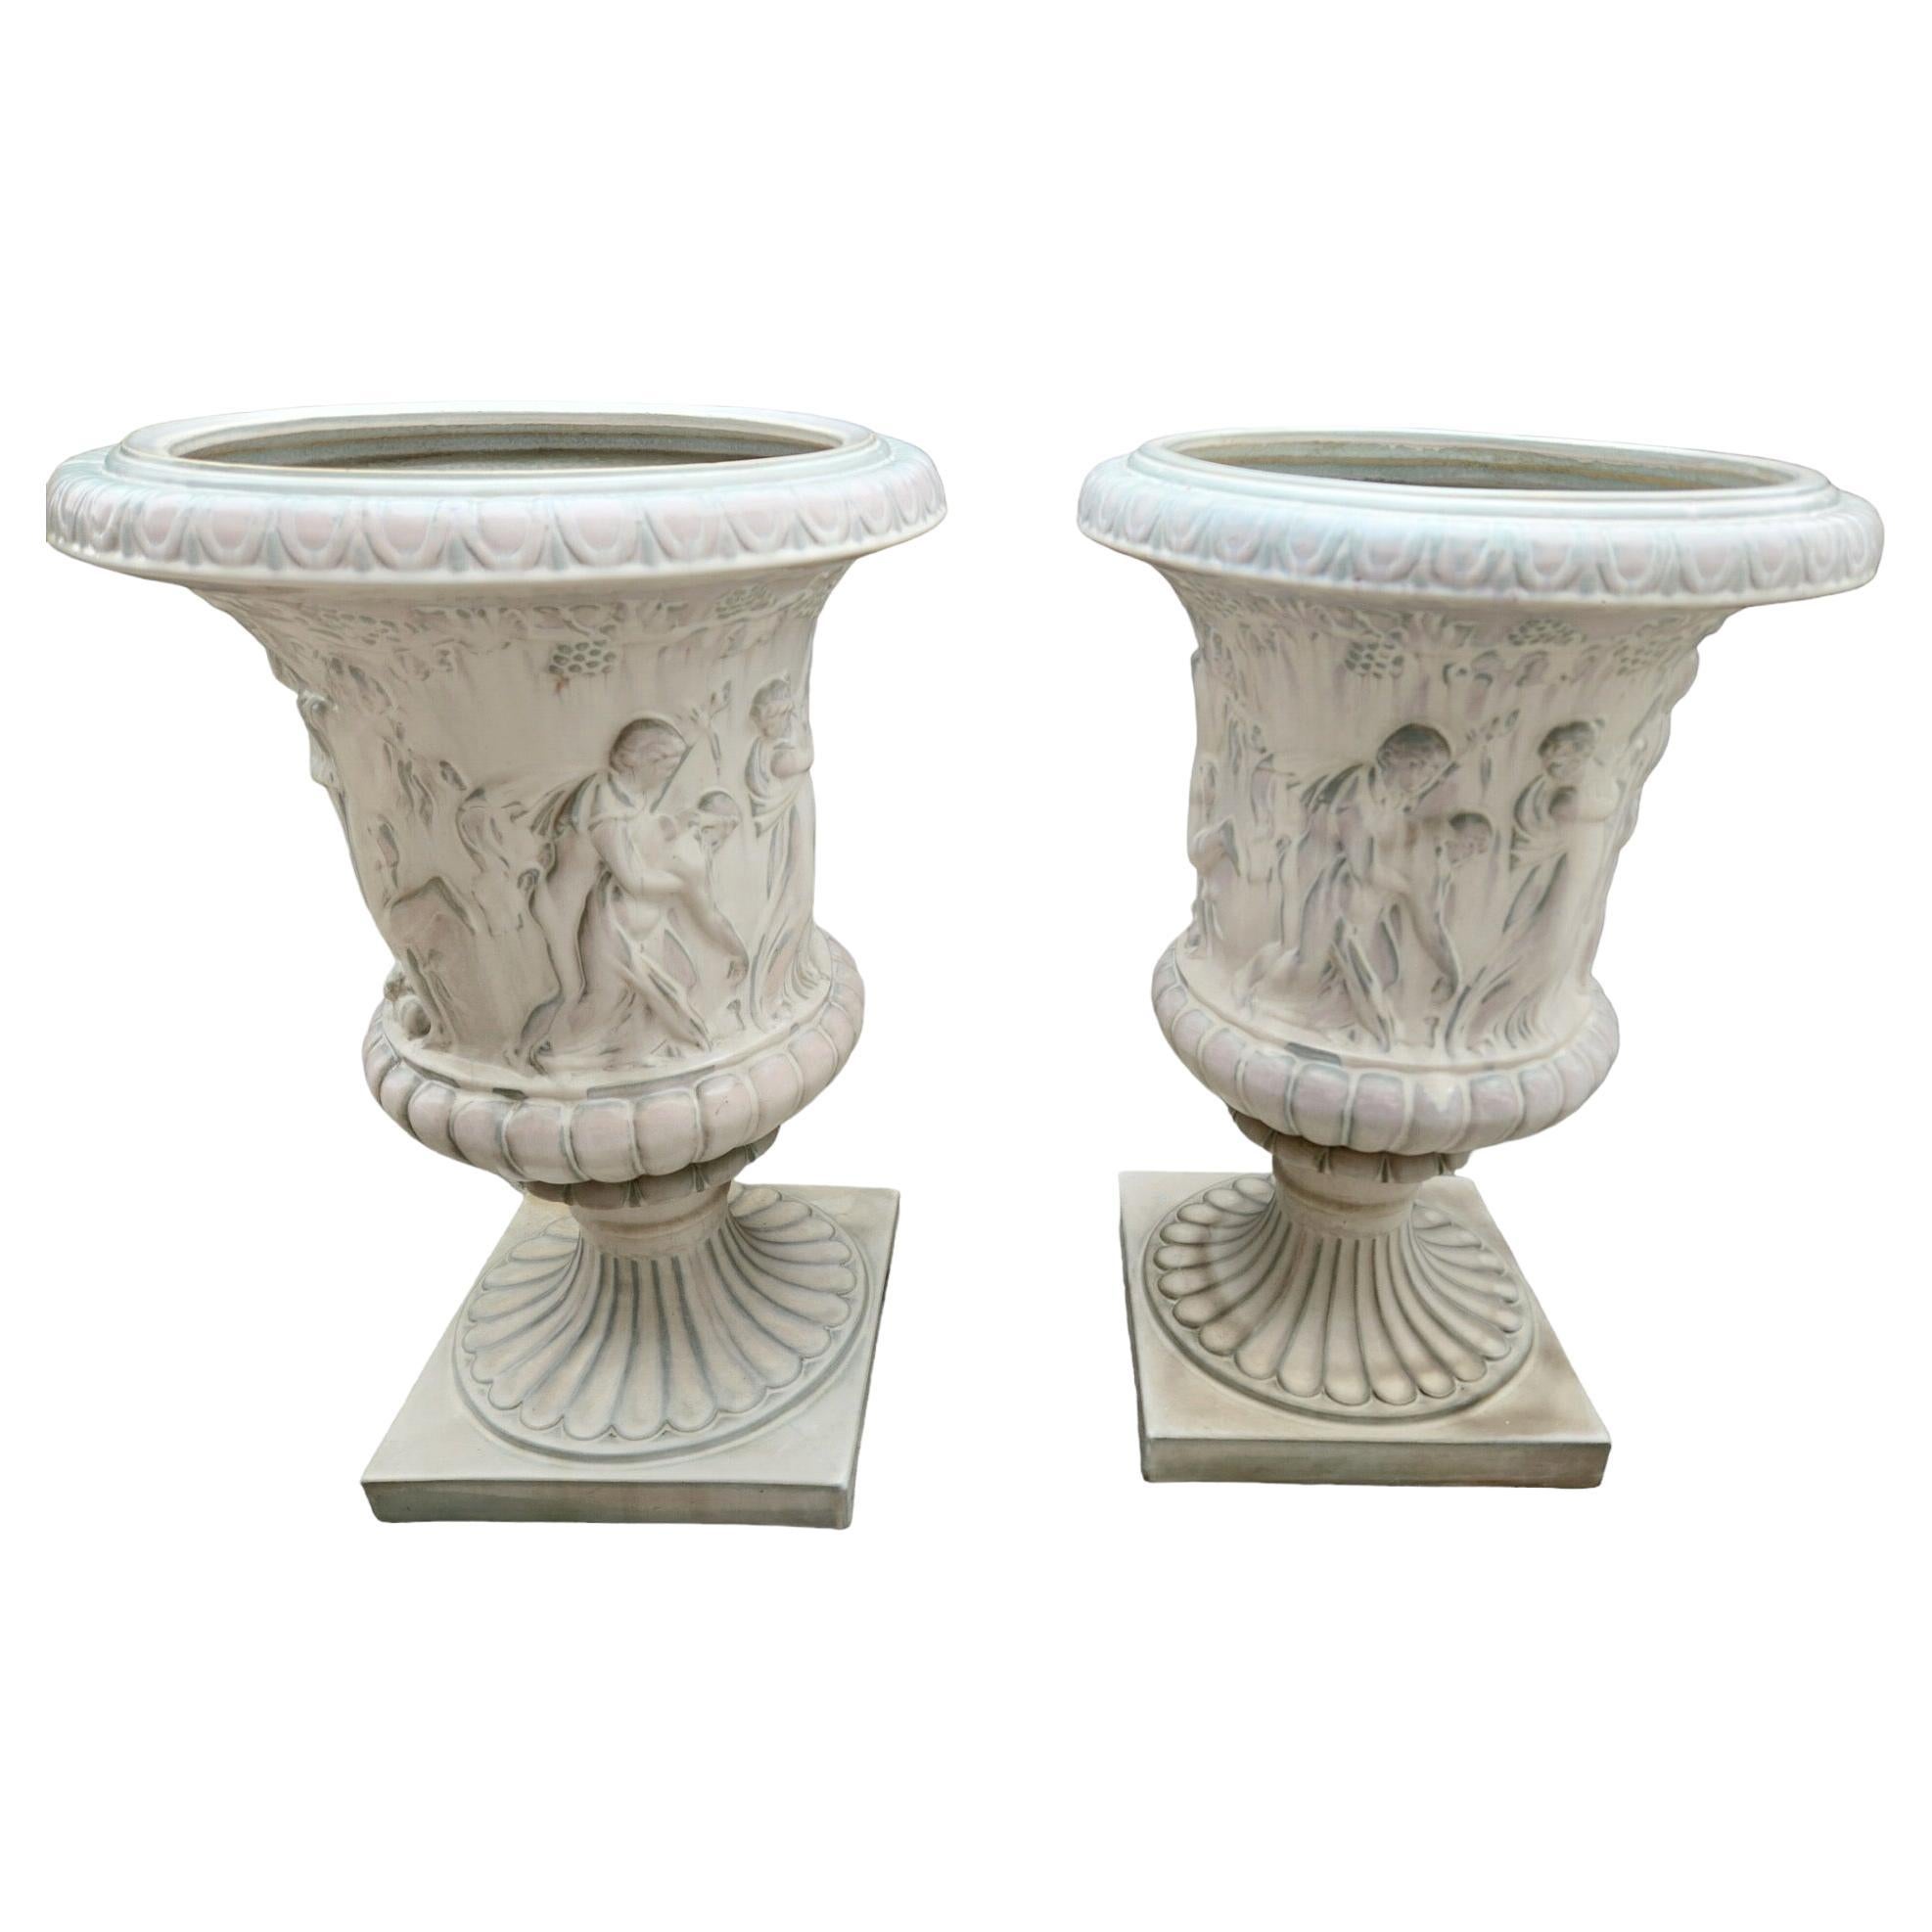 Pair of Vintage Glazed Neoclassical Planters For Sale